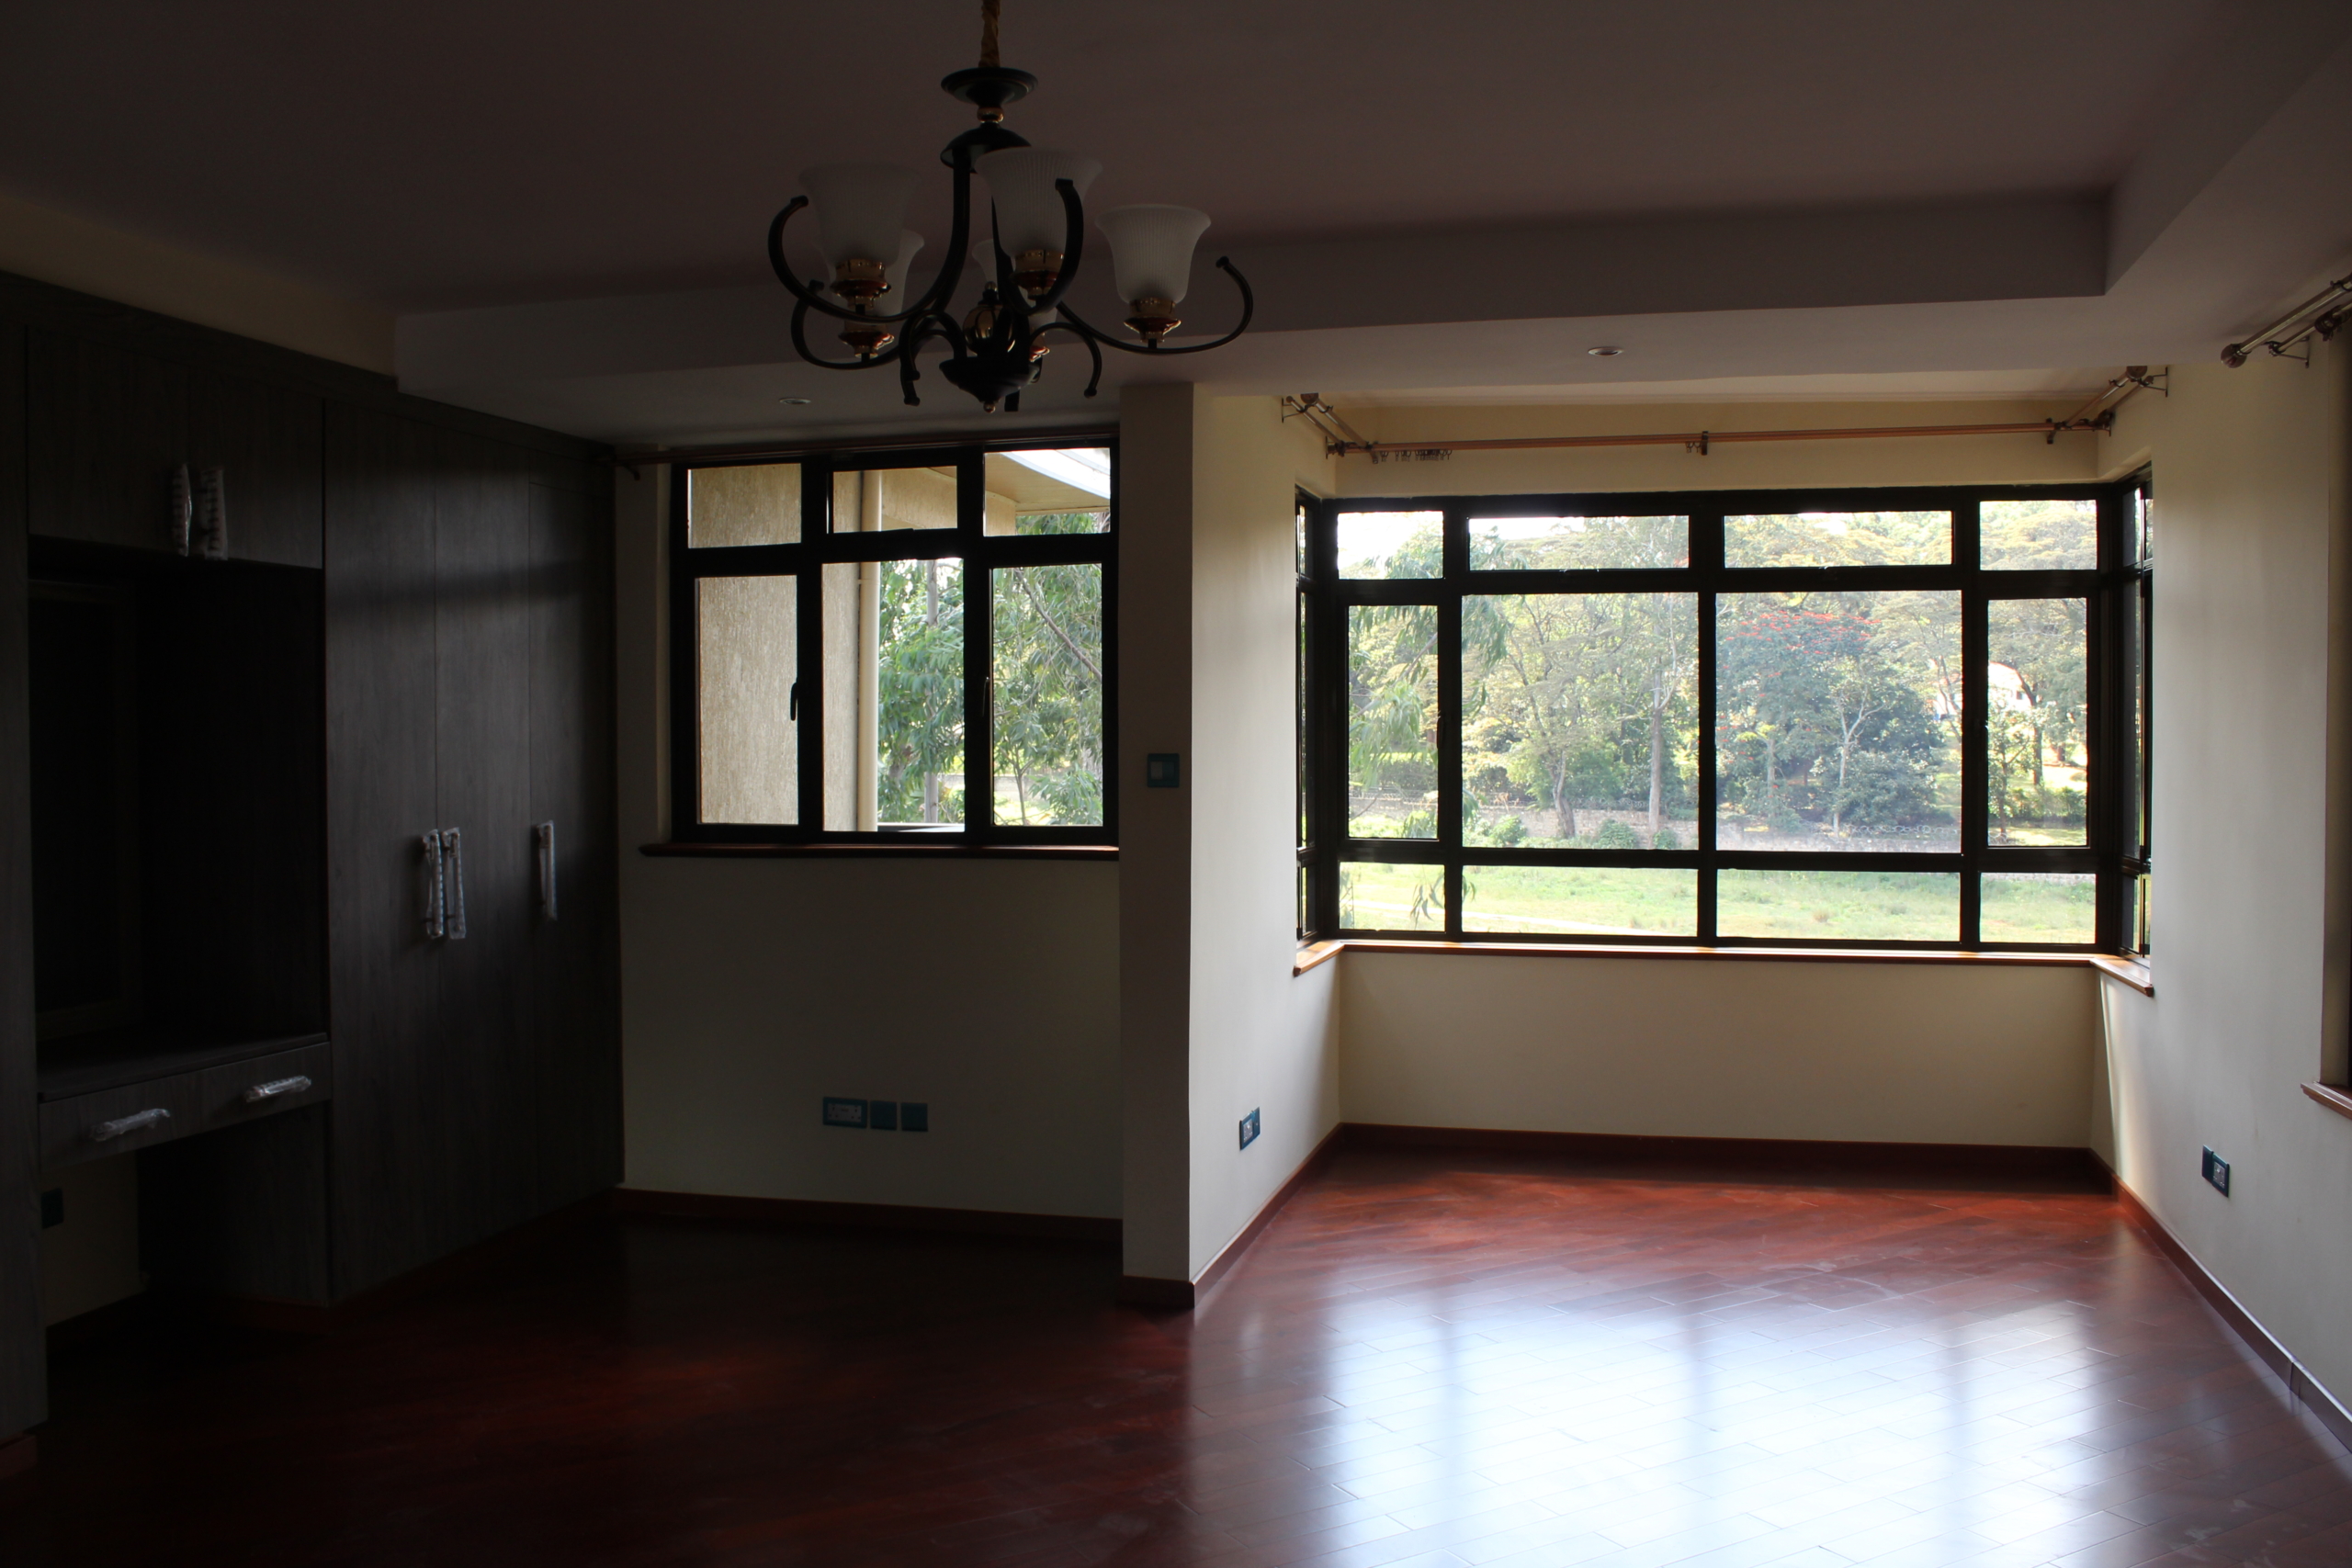 5 Bedroom House For Sale In LAVINGTON